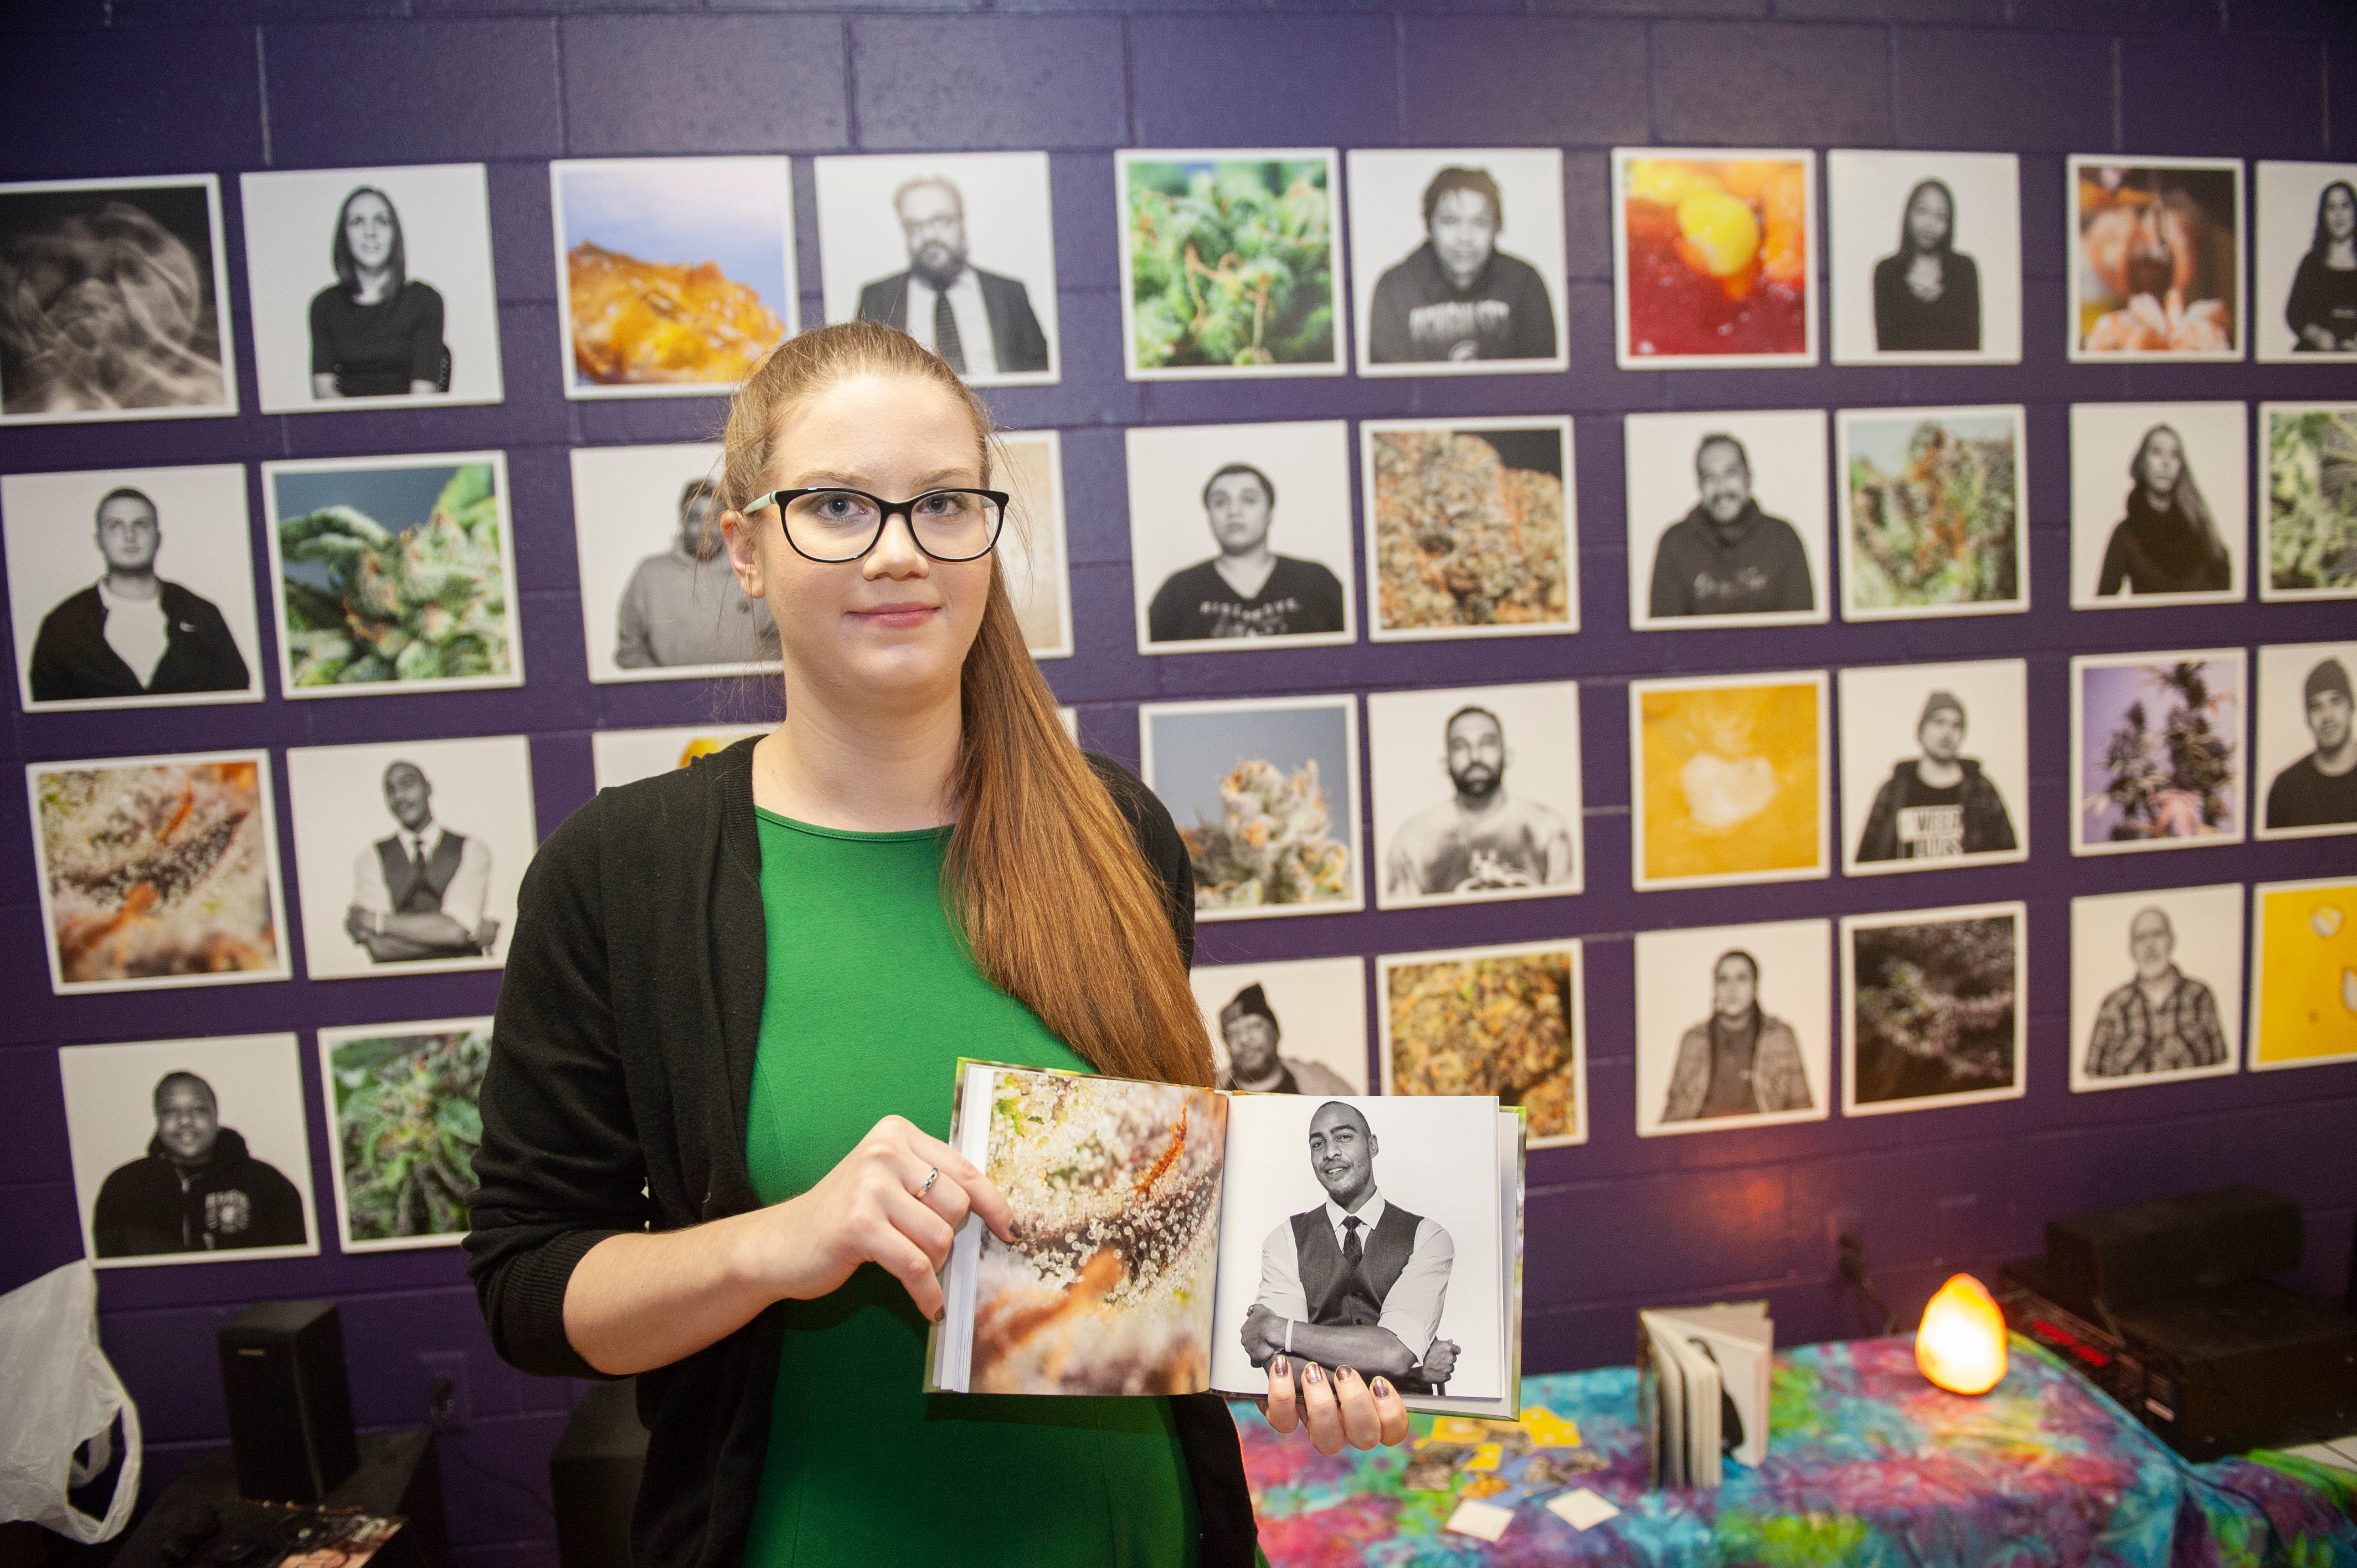 Photographer Erin Short of Detroit was the featured artist at "The Art of Cannabis" art exhibition and tasting event. The 2018 College for Creative Studies graduate showed her senior thesis project exploring the lives of Michigan medical marijuana patients and their preferred methods of using cannabis.